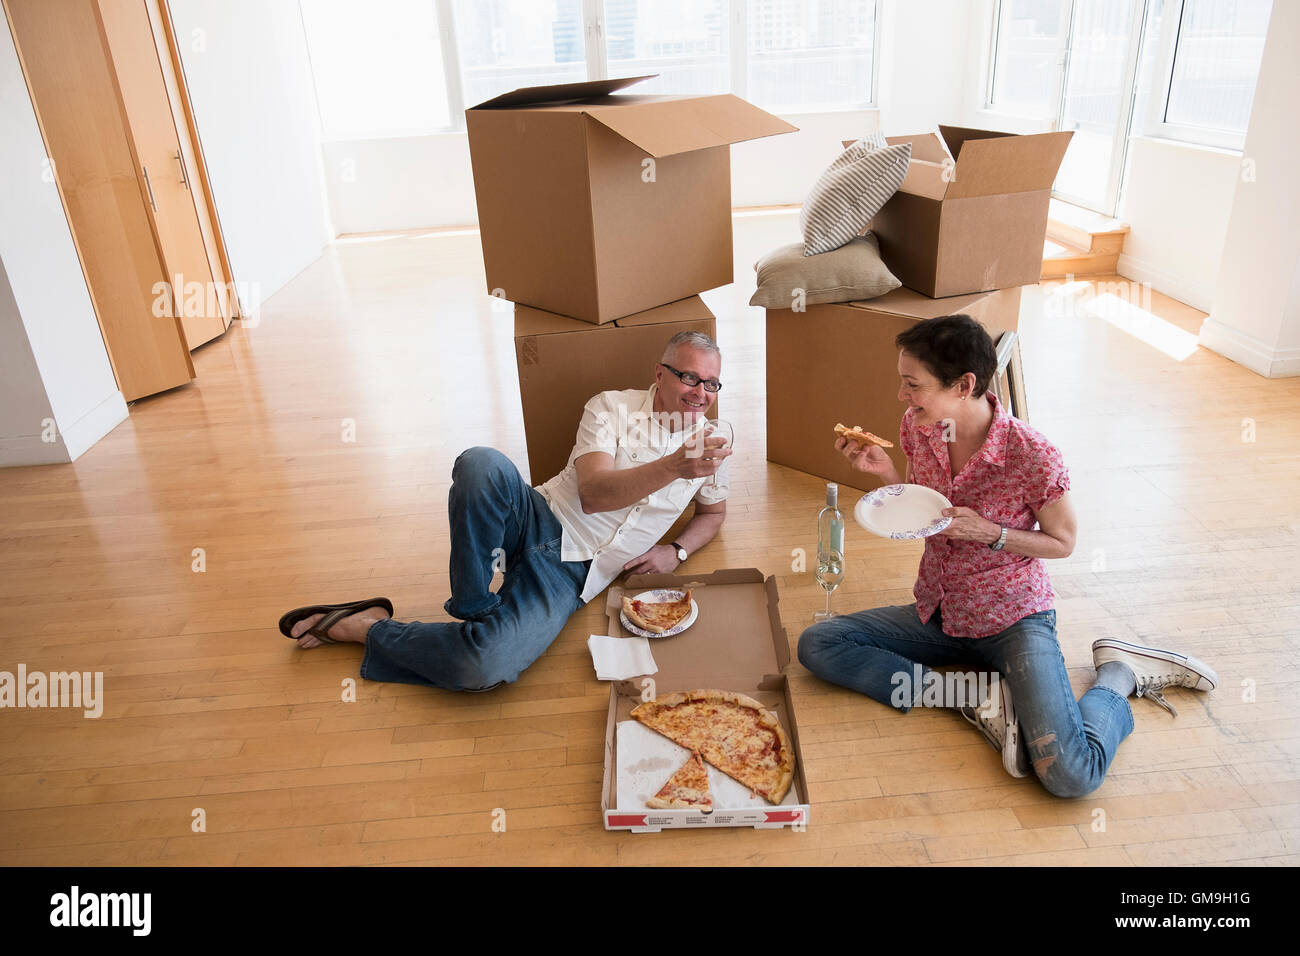 Couple eating pizza in new apartment Stock Photo